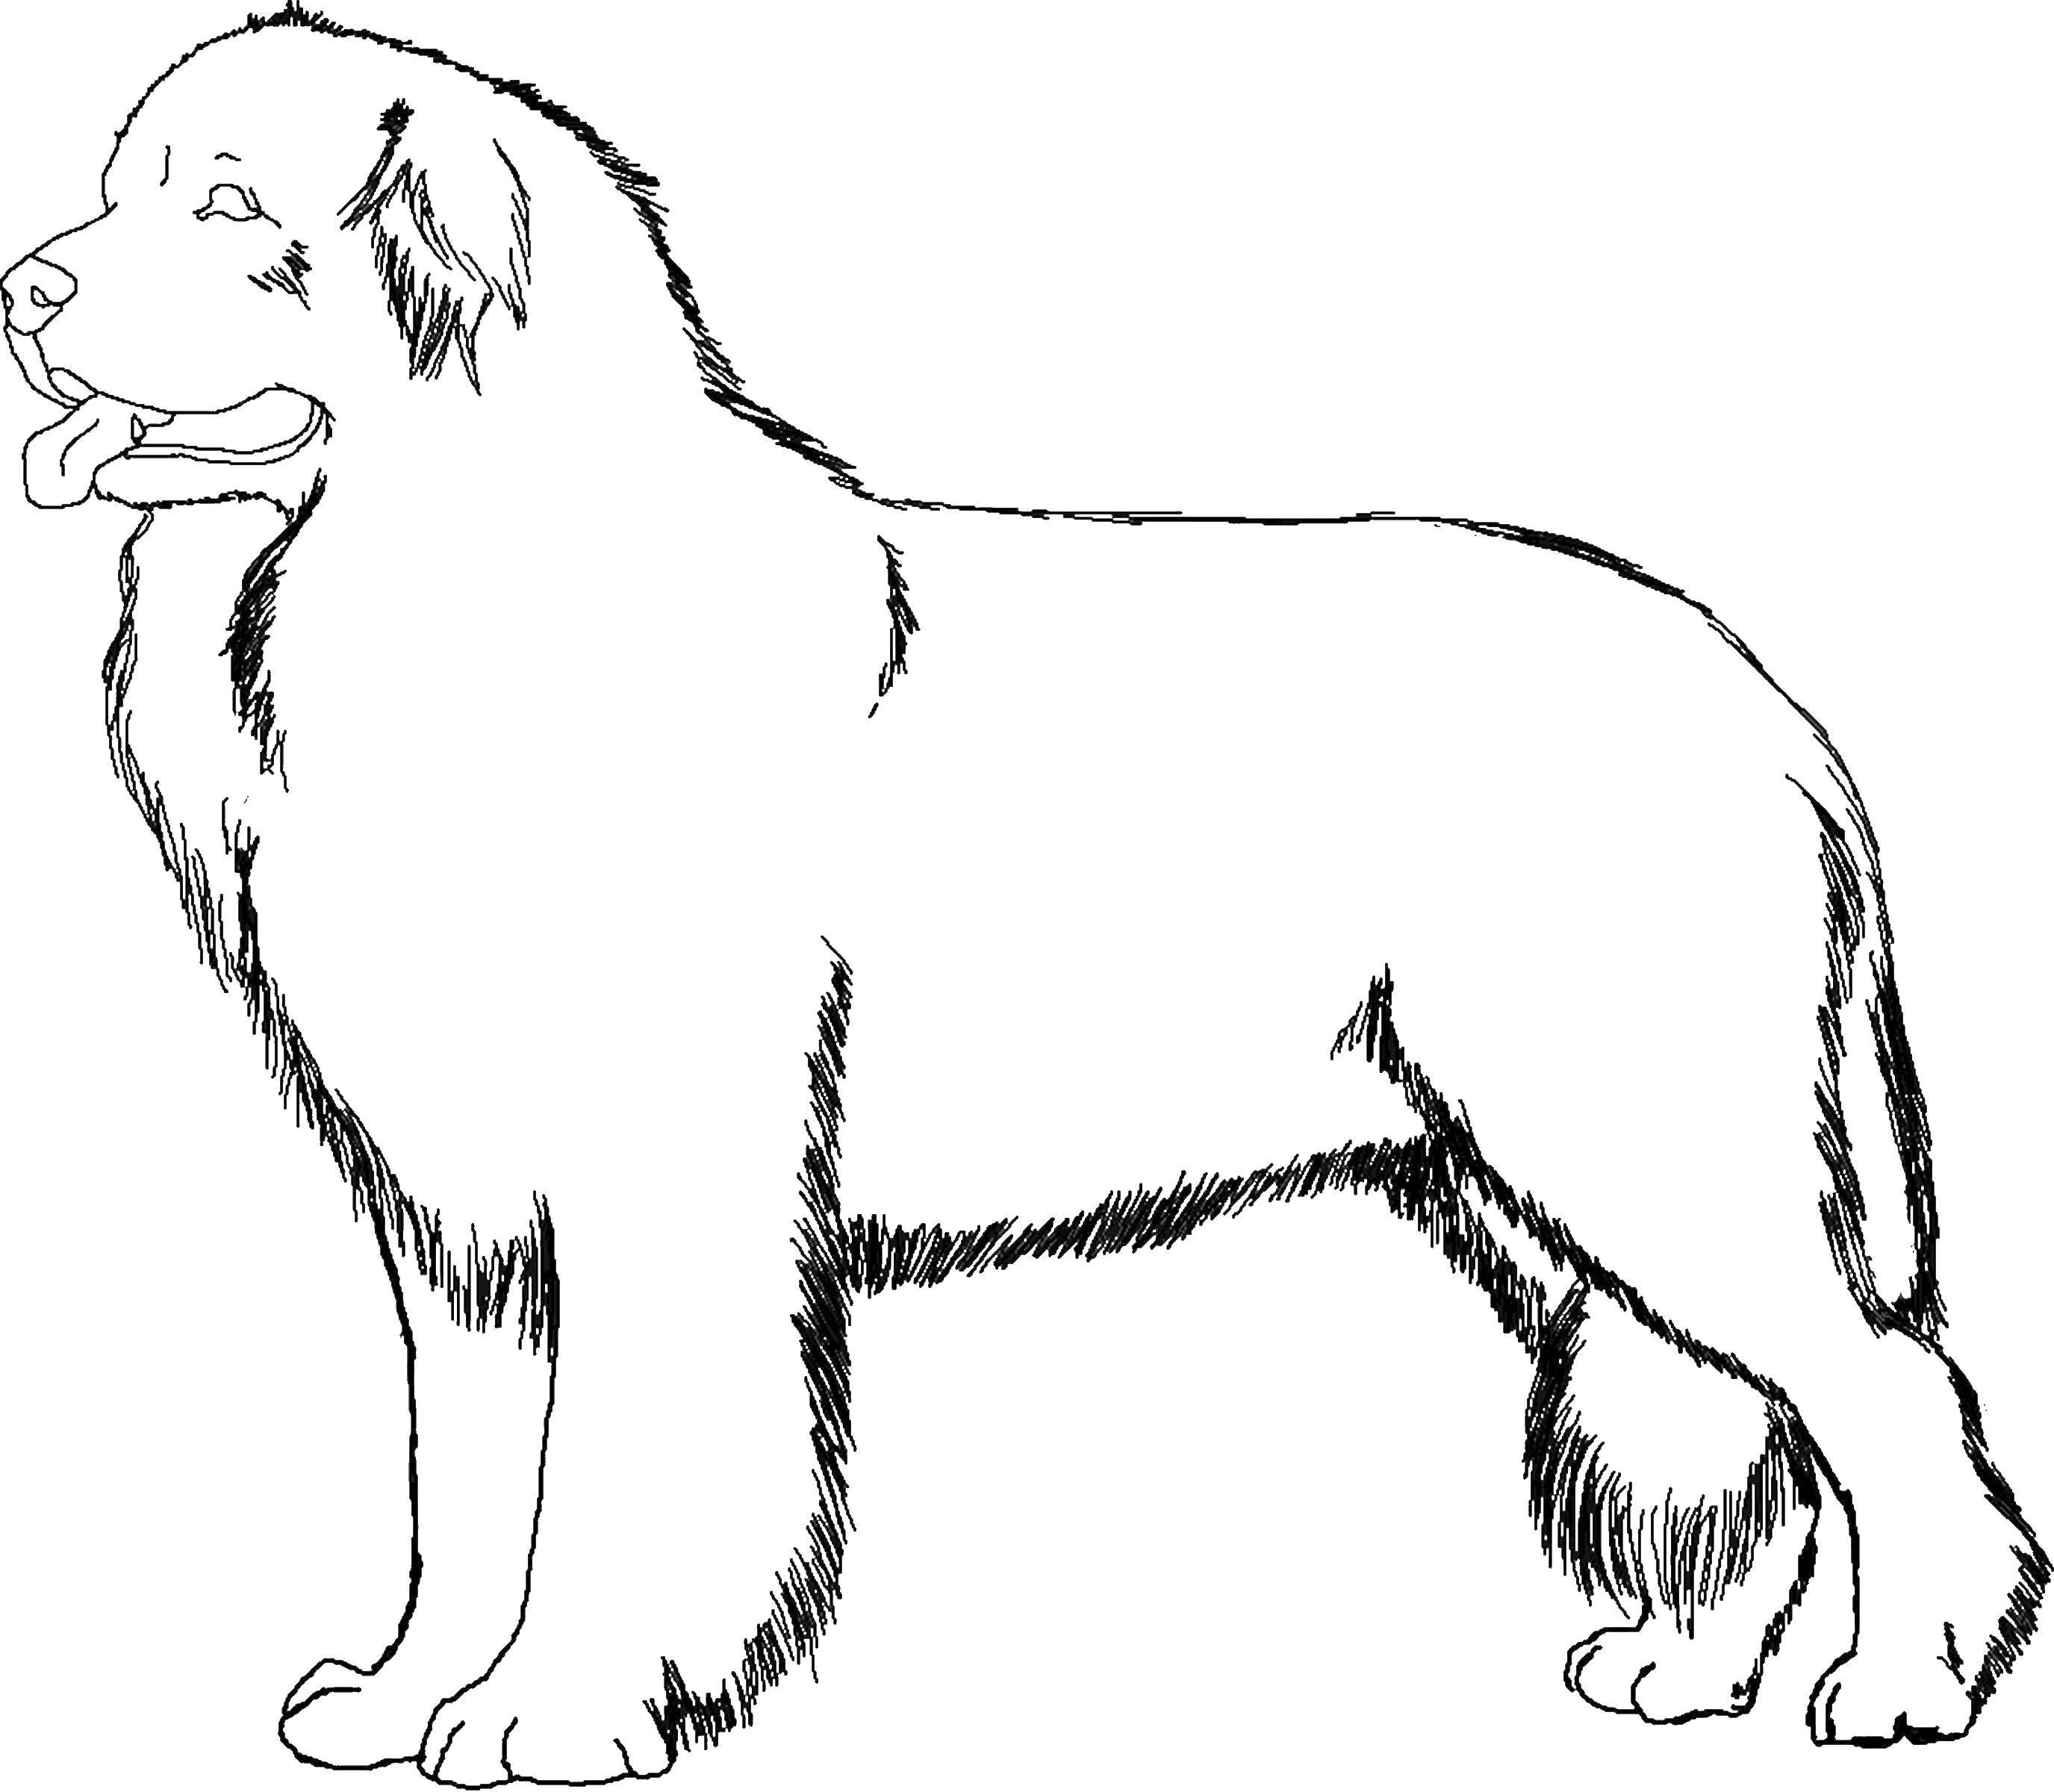 Coloring Dog. Category Pets allowed. Tags:  animals, dog, dog.